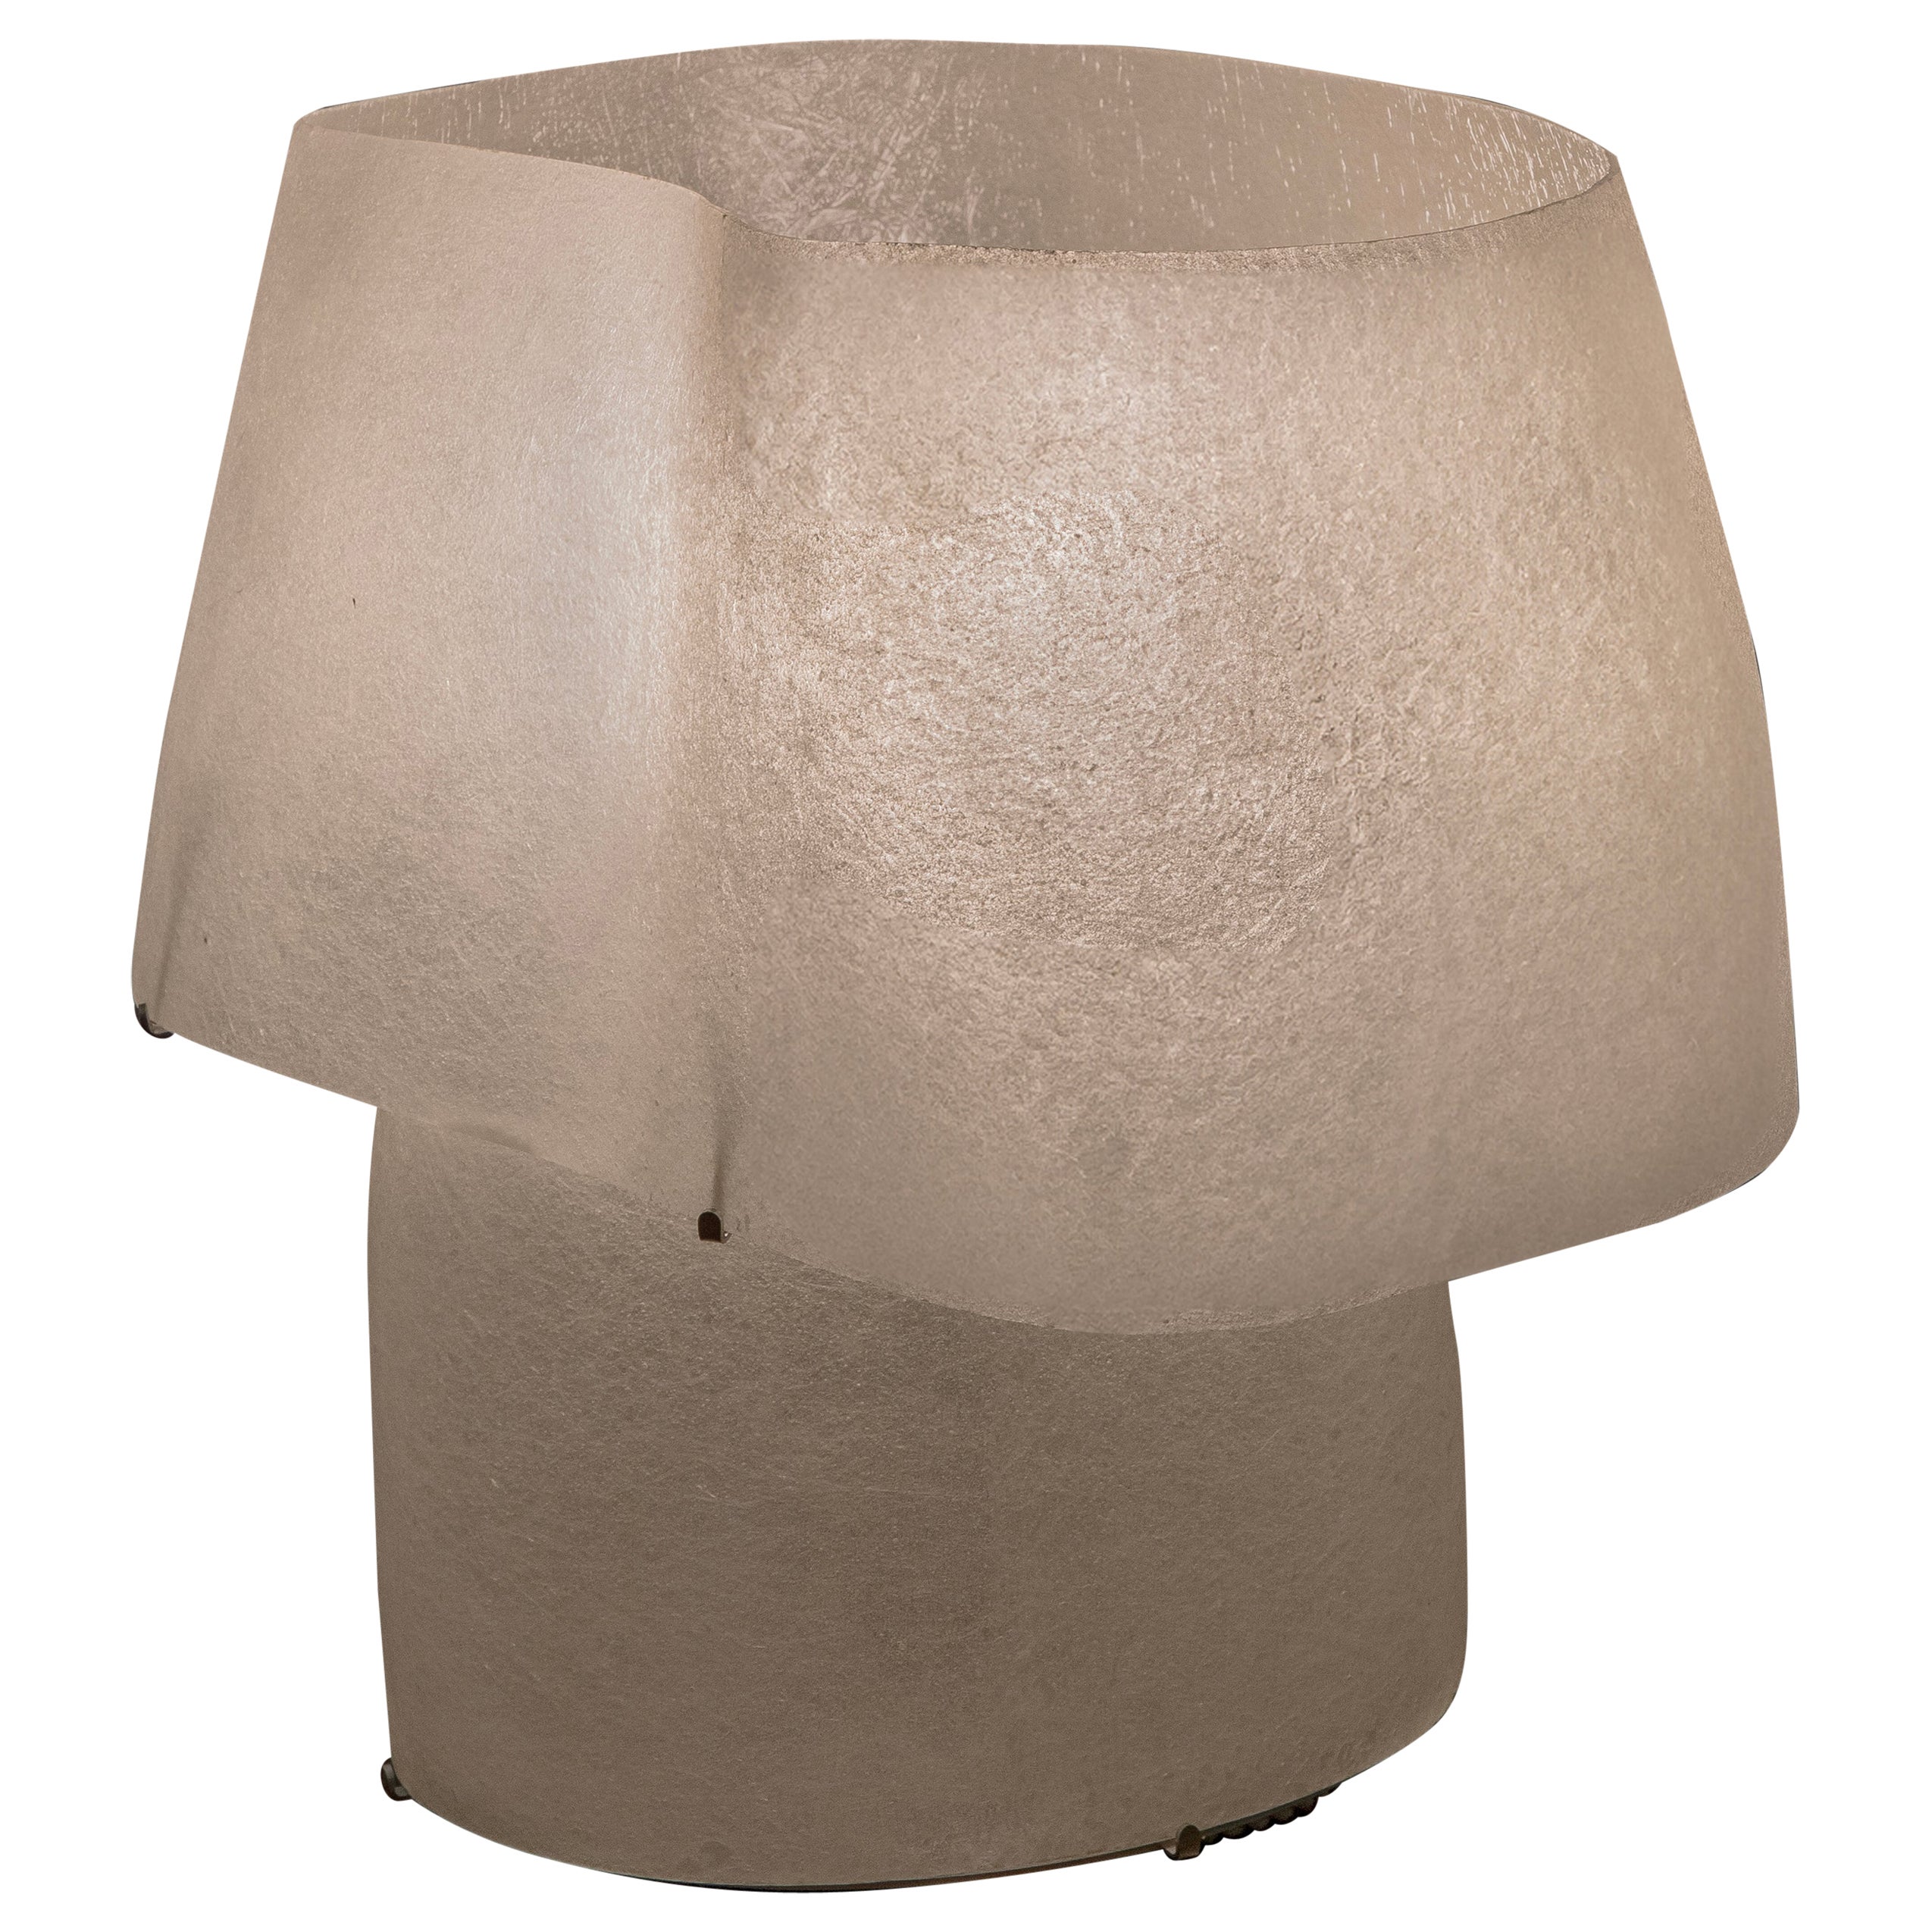 "Mush" Lamp Fibreglass Shade and Polished Stainless Steel Frame For Sale